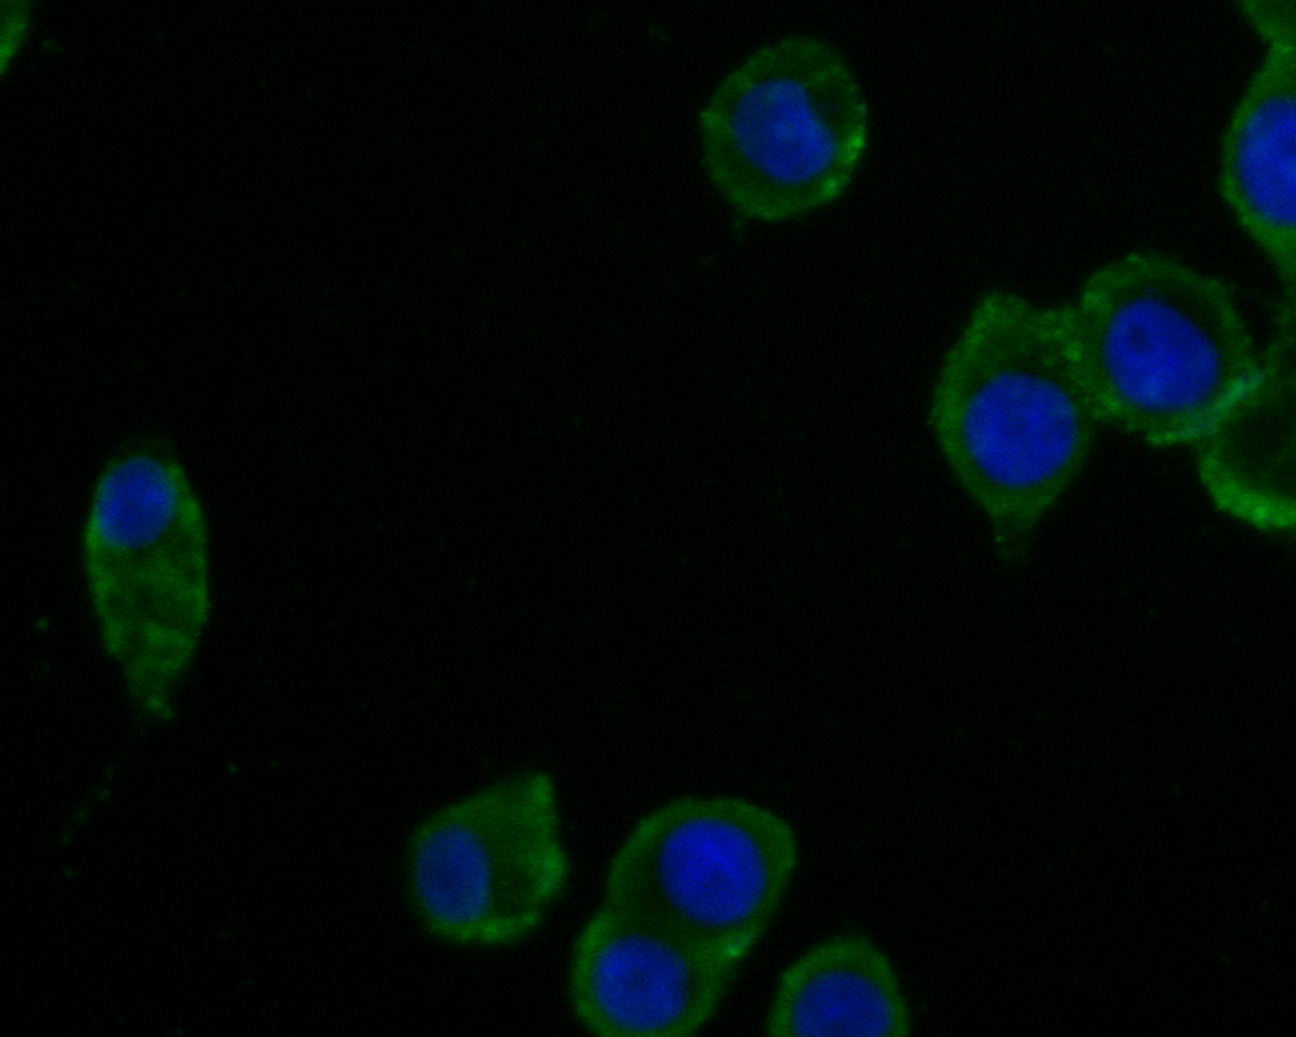 ICC staining of CPN1 in LOVO cells (green). Formalin fixed cells were permeabilized with 0.1% Triton X-100 in TBS for 10 minutes at room temperature and blocked with 1% Blocker BSA for 15 minutes at room temperature. Cells were probed with the primary antibody (HA500462, 1/100) for 1 hour at room temperature, washed with PBS. Alexa Fluor®488 Goat anti-Rabbit IgG was used as the secondary antibody at 1/1,000 dilution. The nuclear counter stain is DAPI (blue).